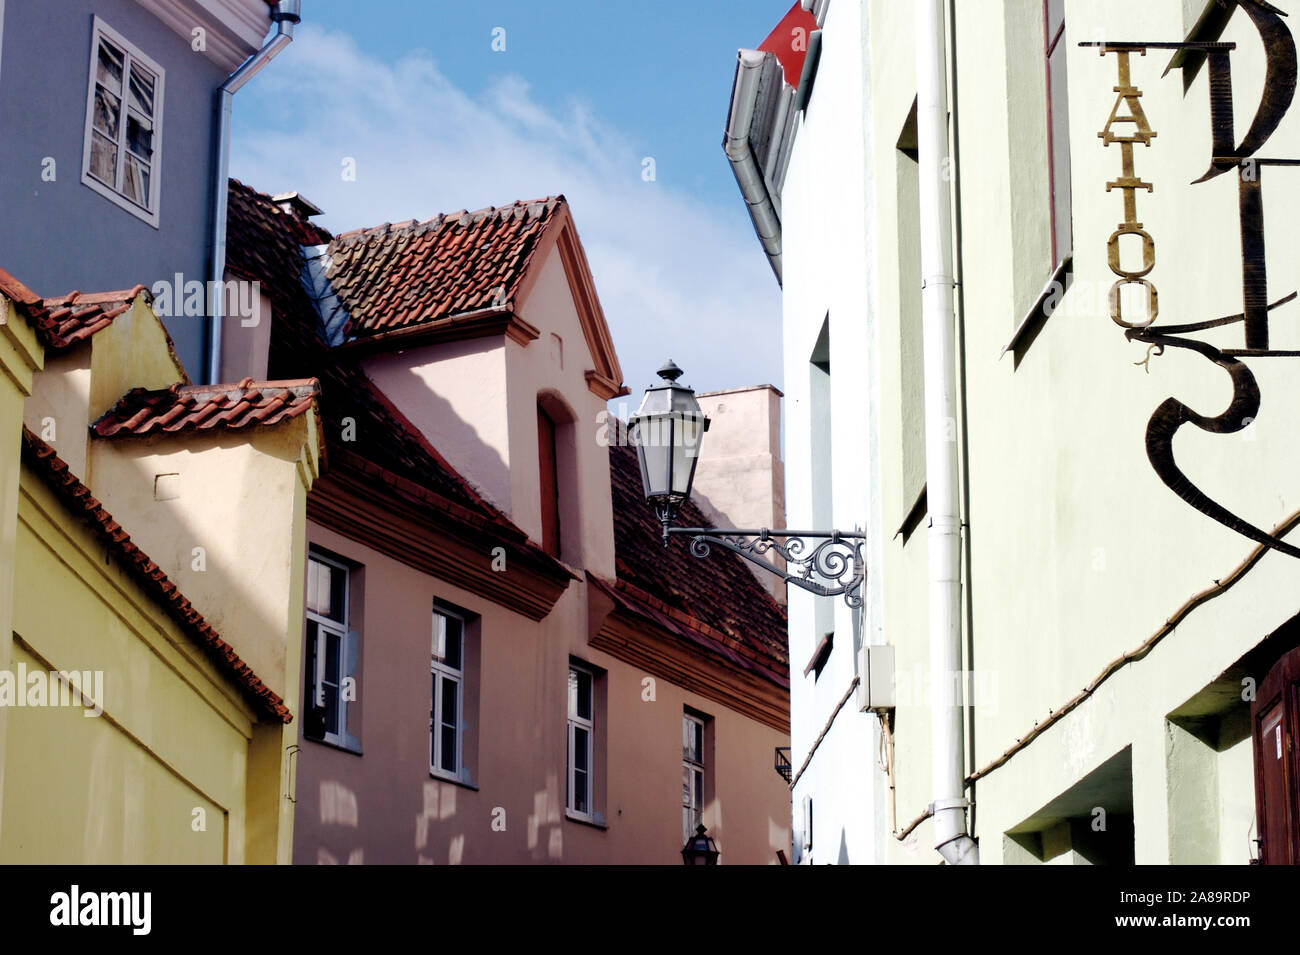 Colourful houses in street, Vilnius, Lithuania Stock Photo